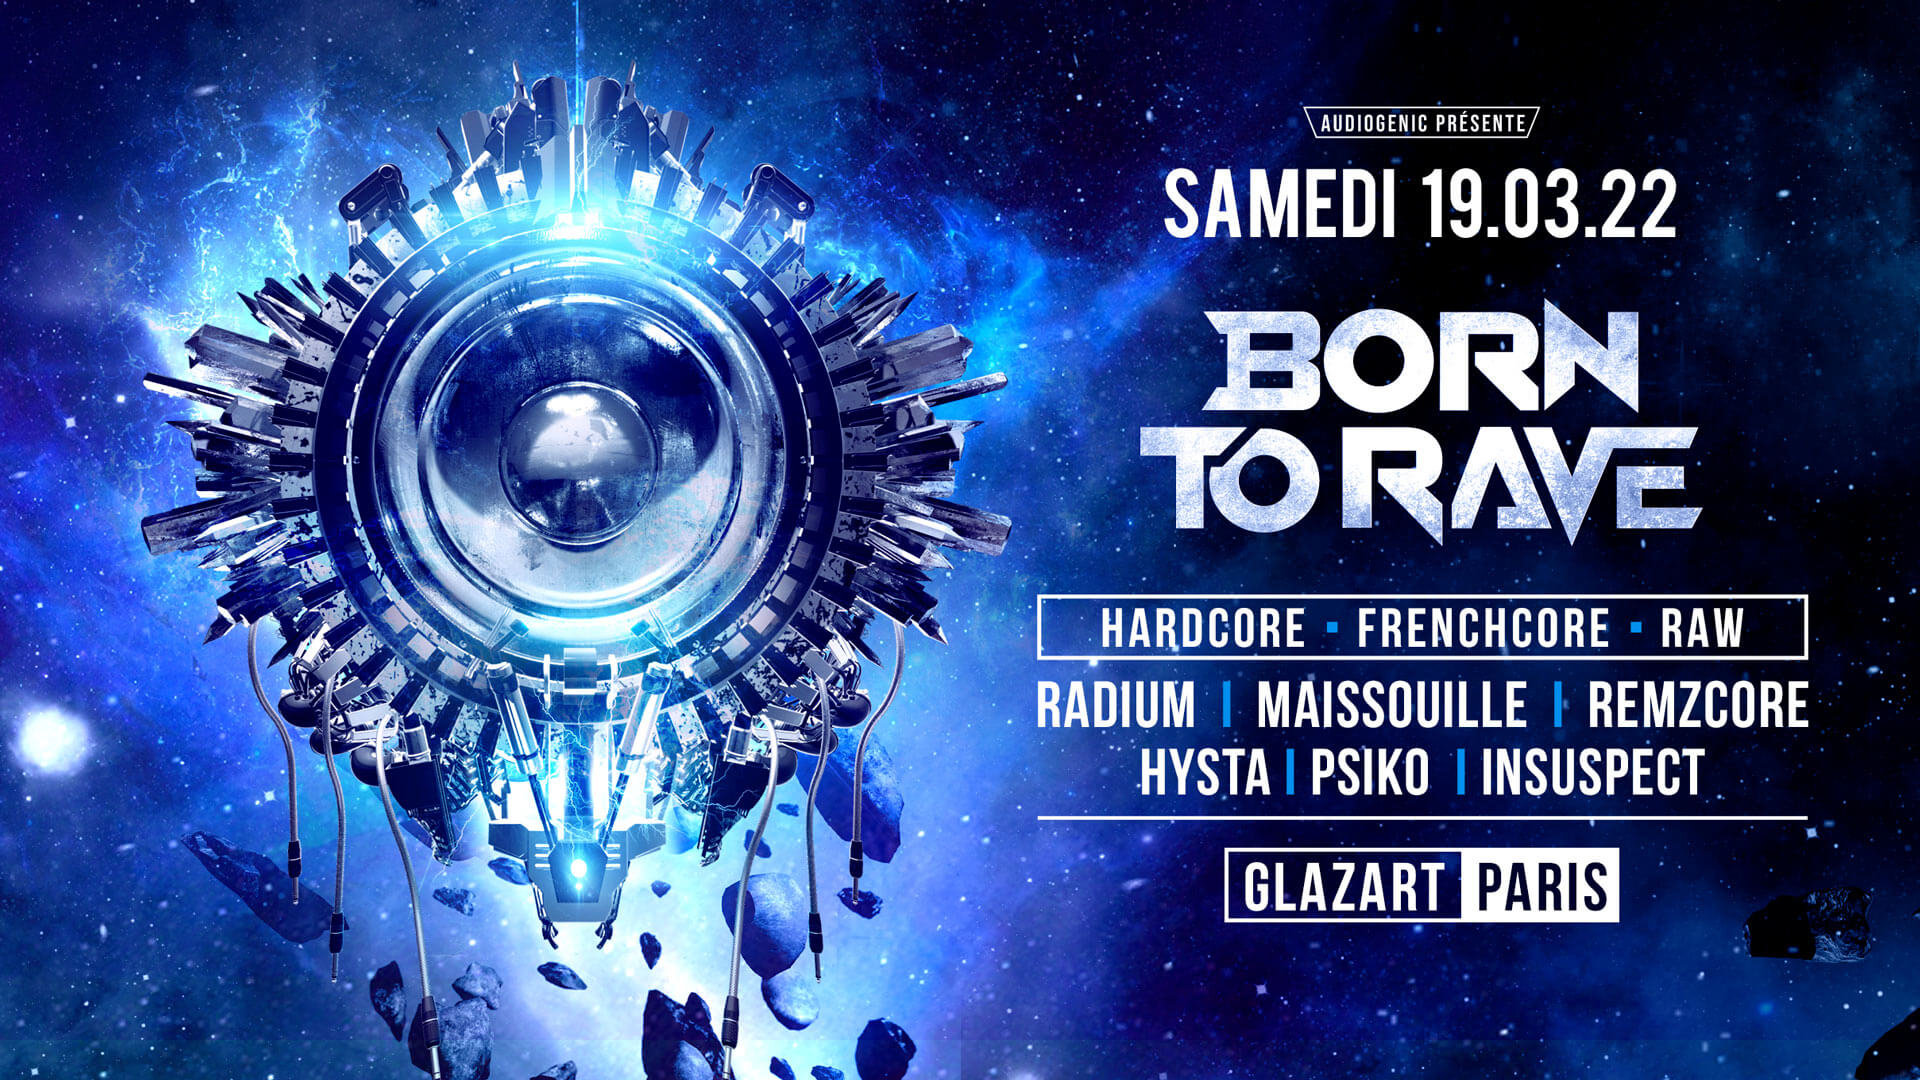 Paris get ready, Born To Rave is coming!